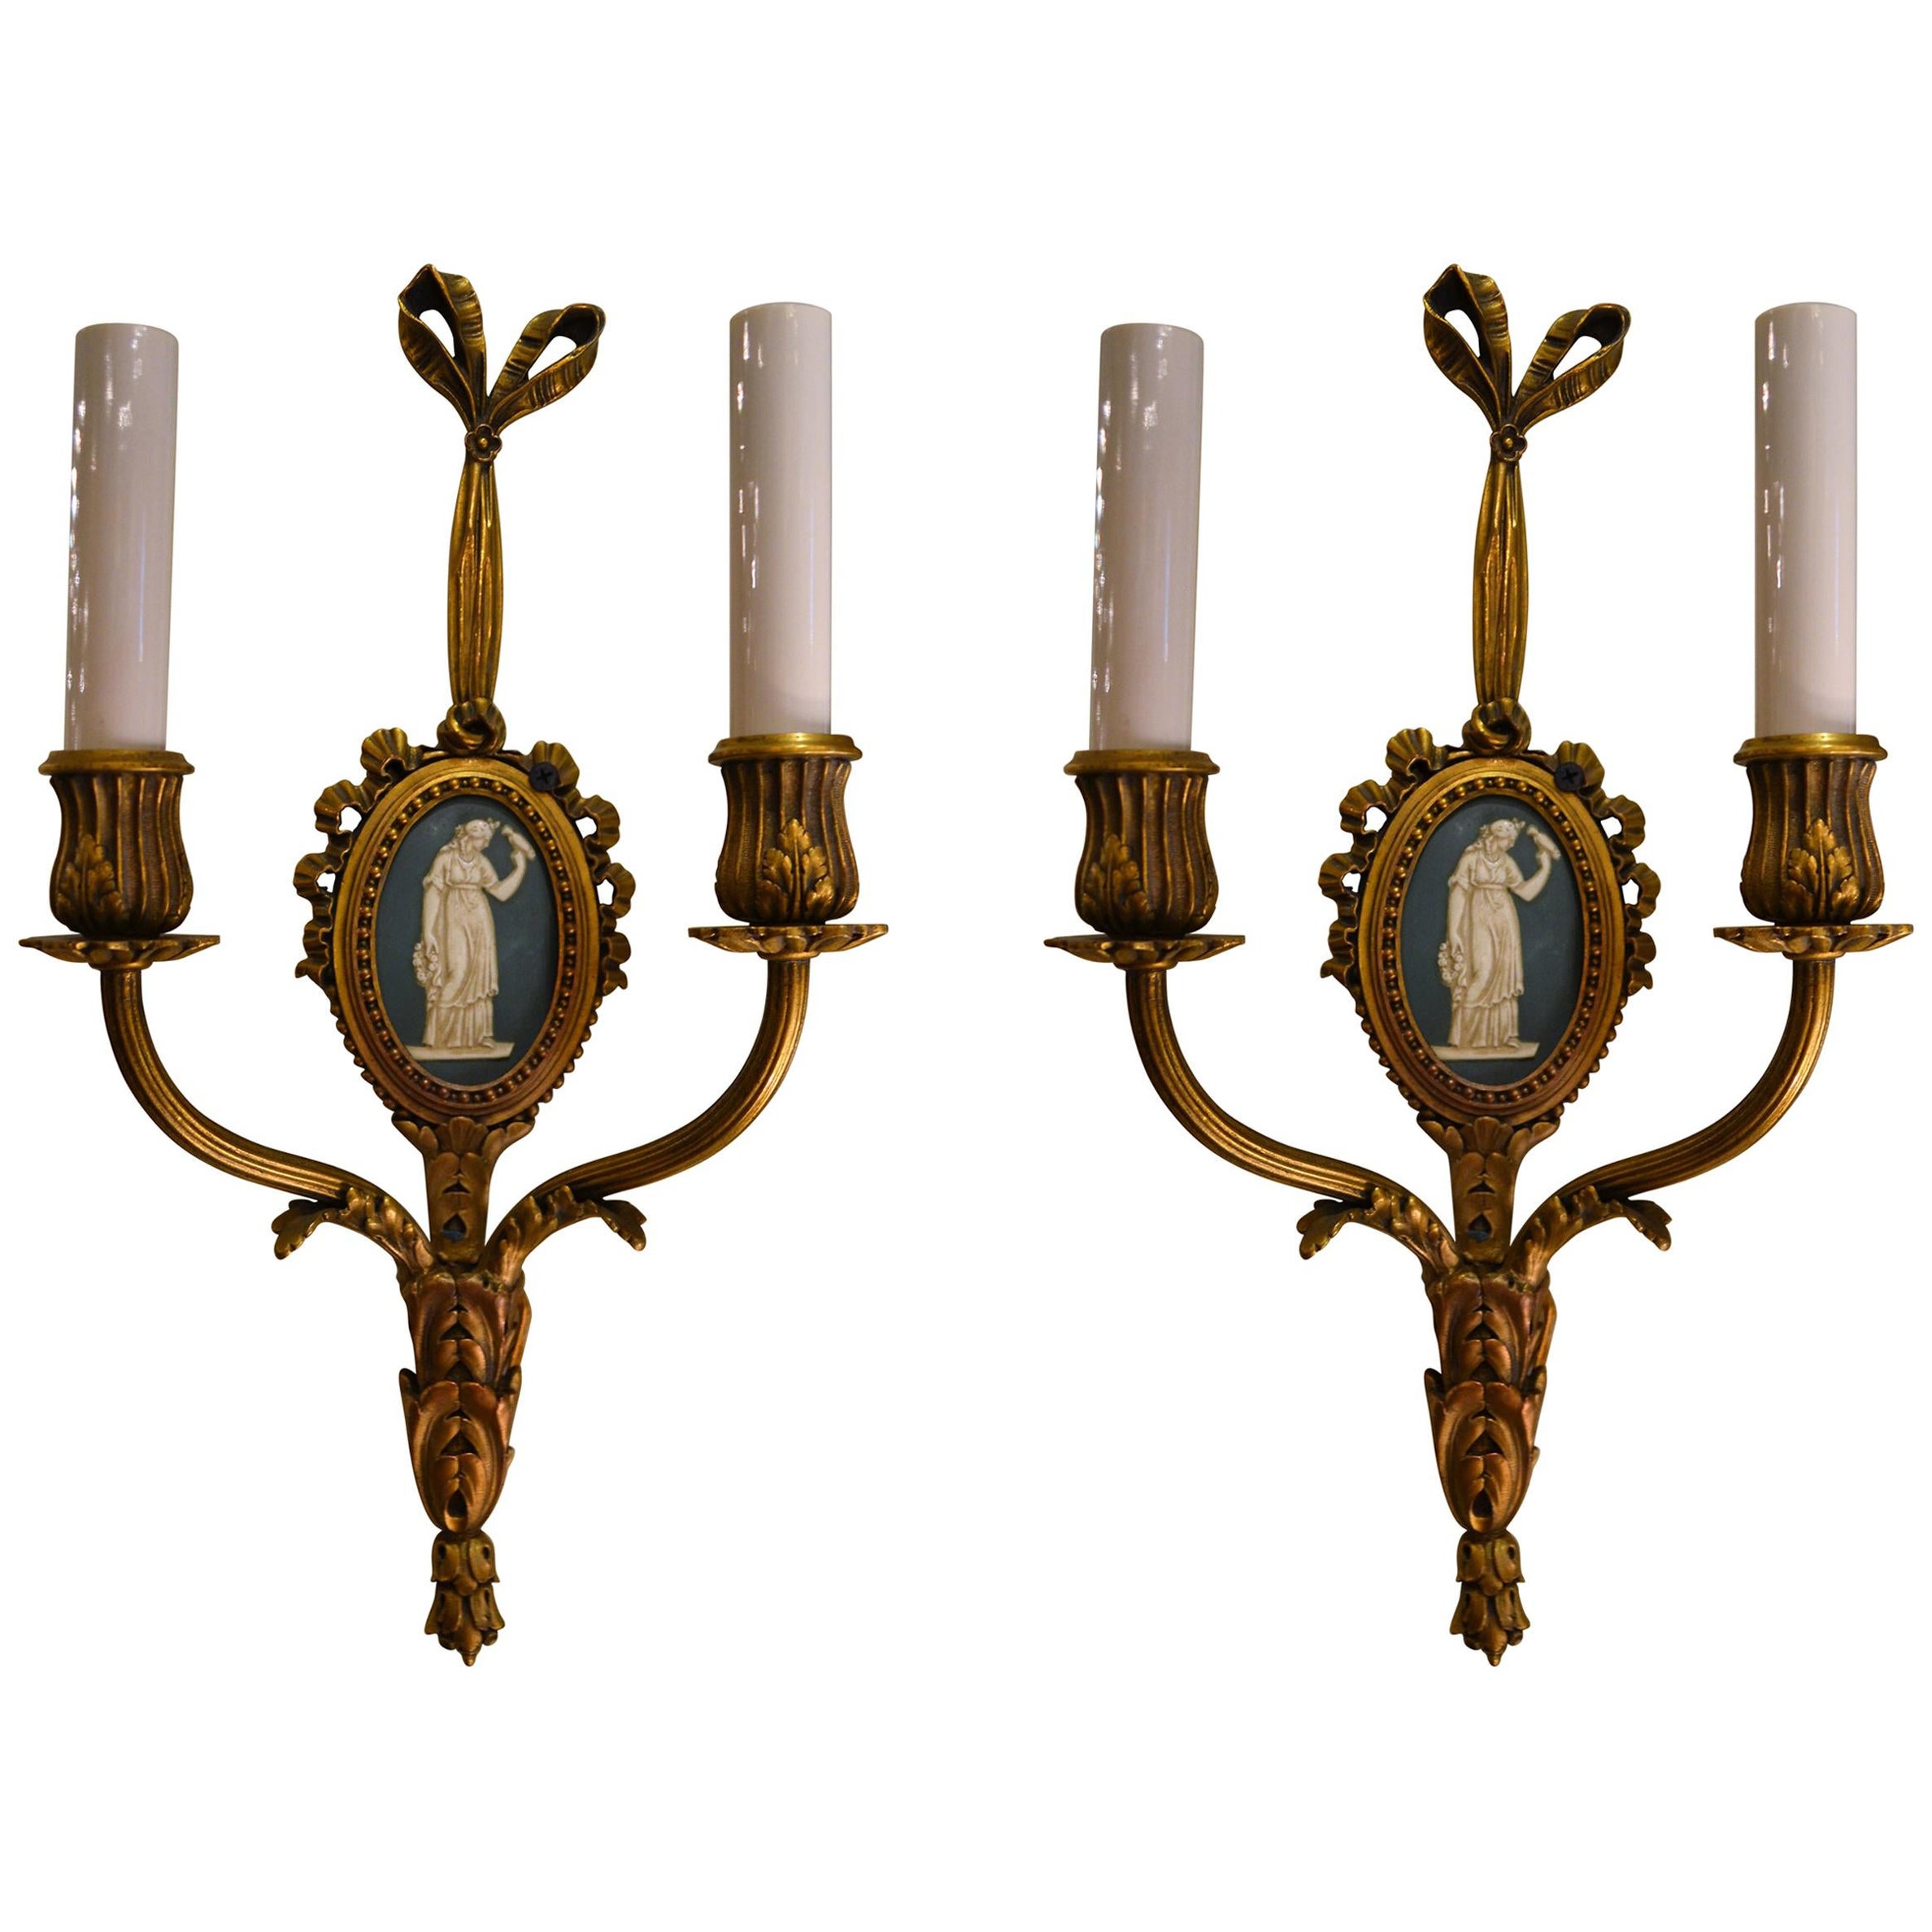 Pair of Elegant Antique French Bronze Wall Sconces with Plaque Inserts For Sale